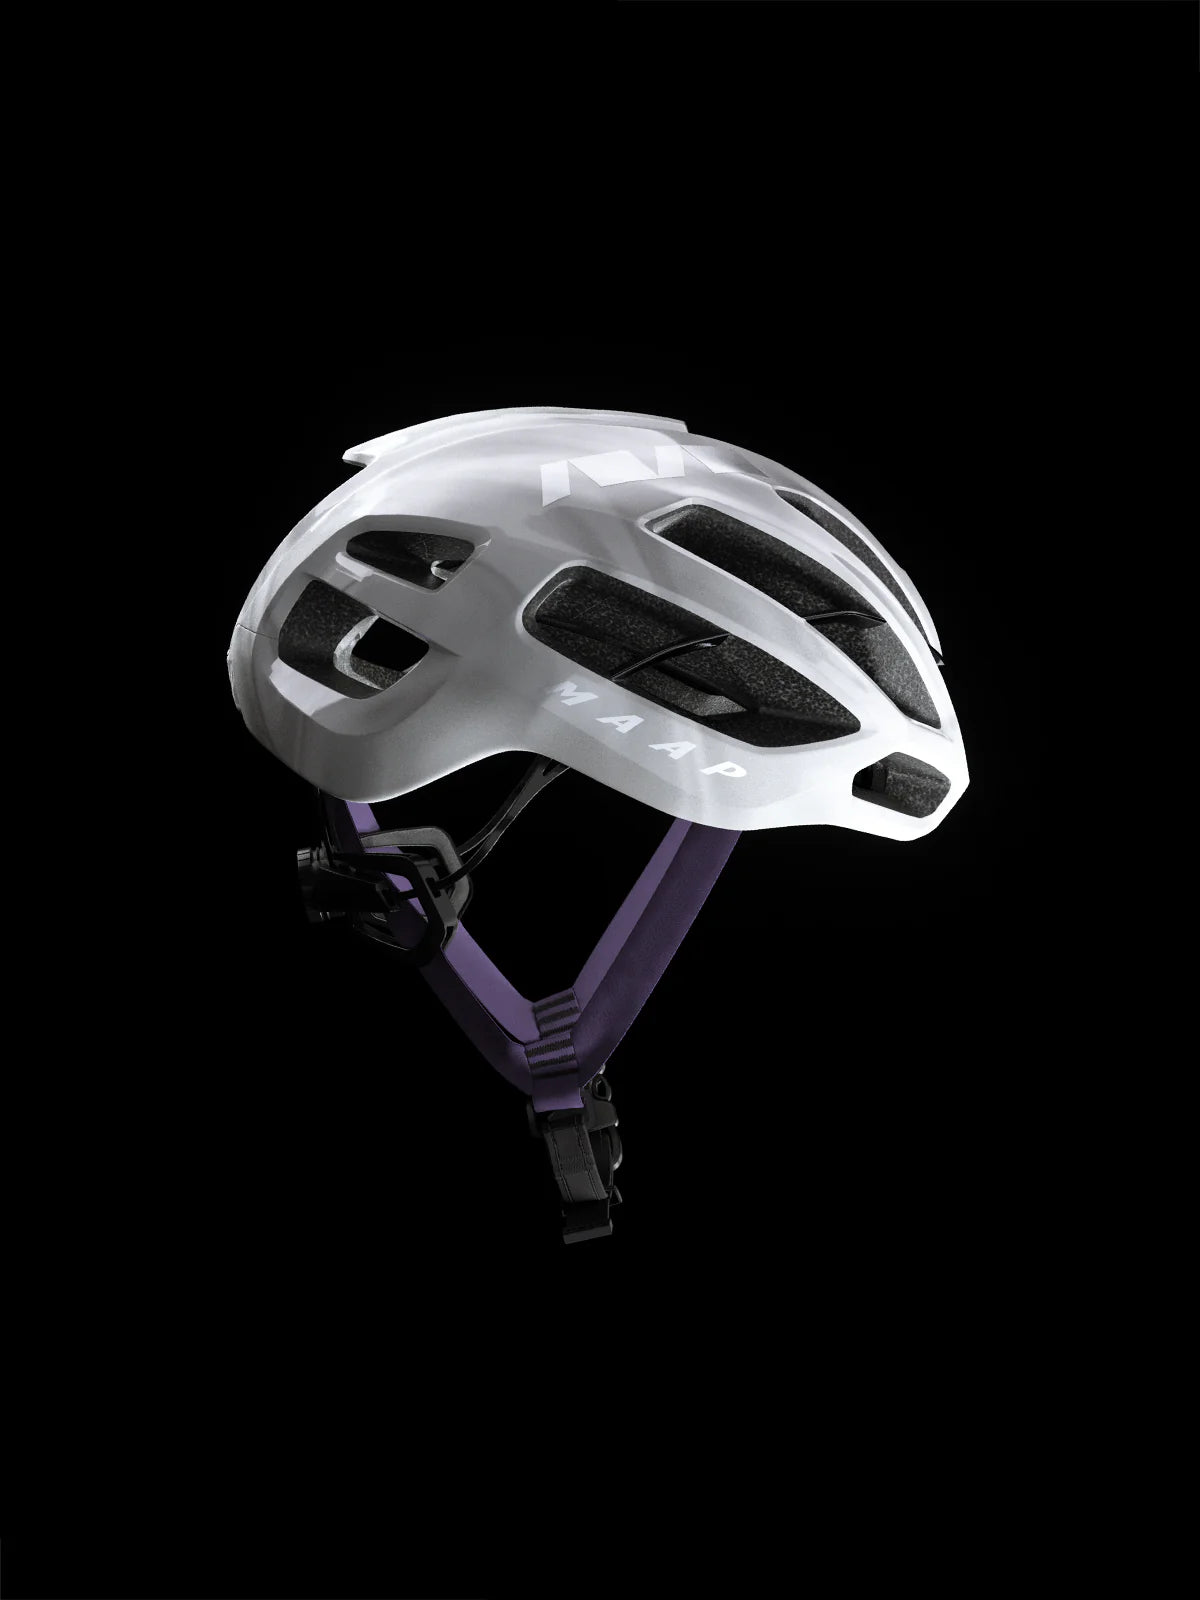 MAAP X KASK Protone Icon ヘルメット フォグ | 美学とパフォーマンスの究極の融合 | CYCLISM